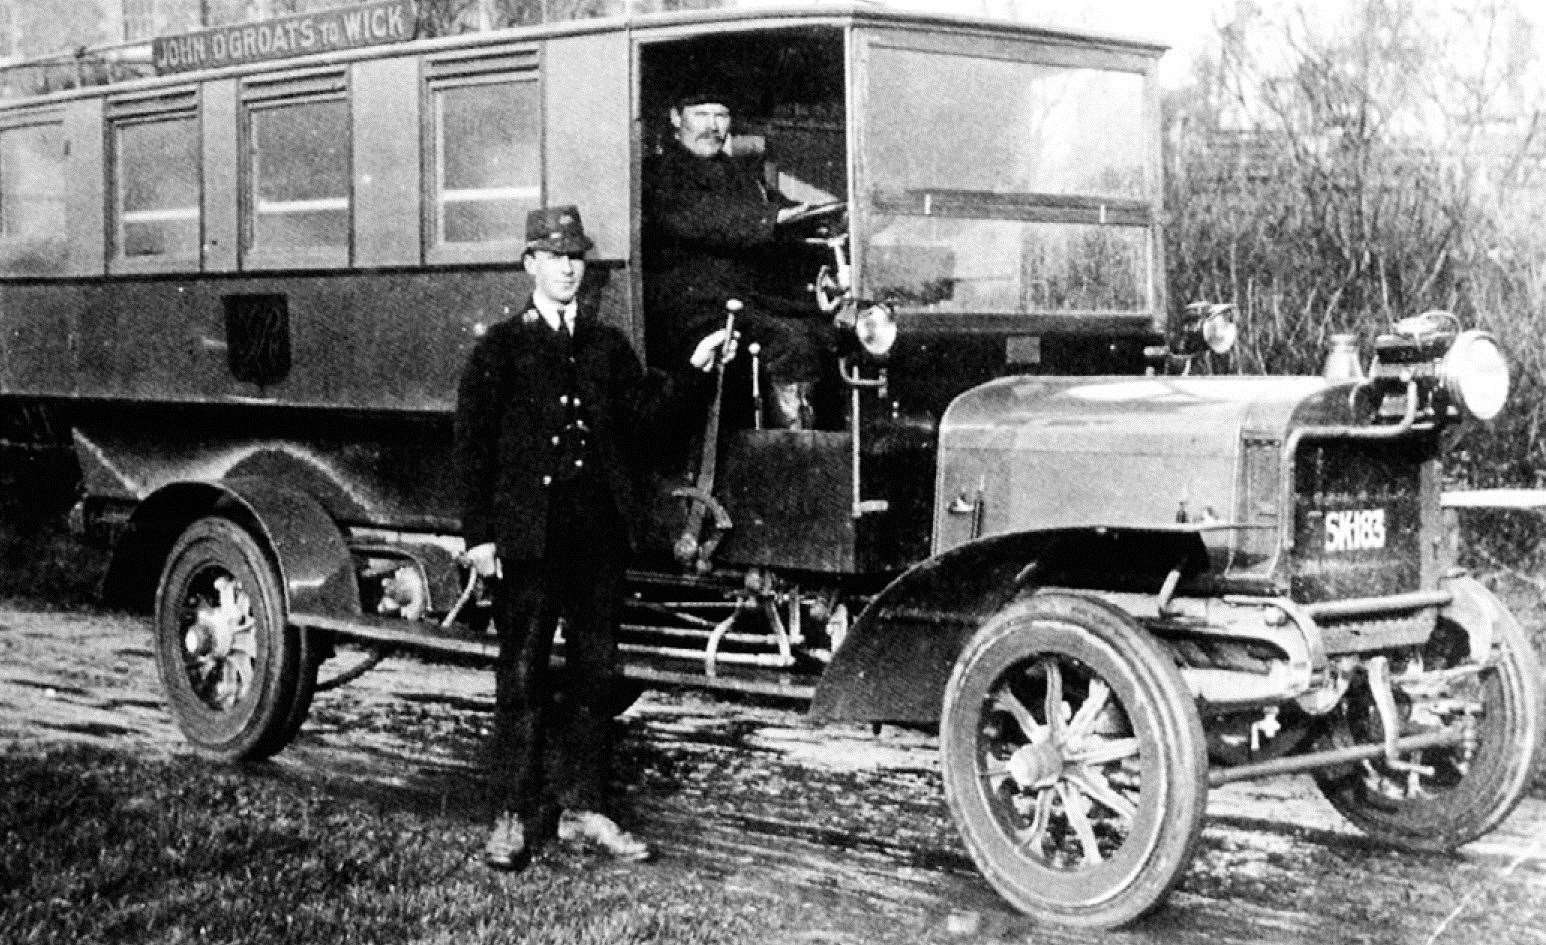 This Halley mail car, owned by R S Waters, ran between Wick and John O’Groats from 1913. The driver was Daniel Mowat.